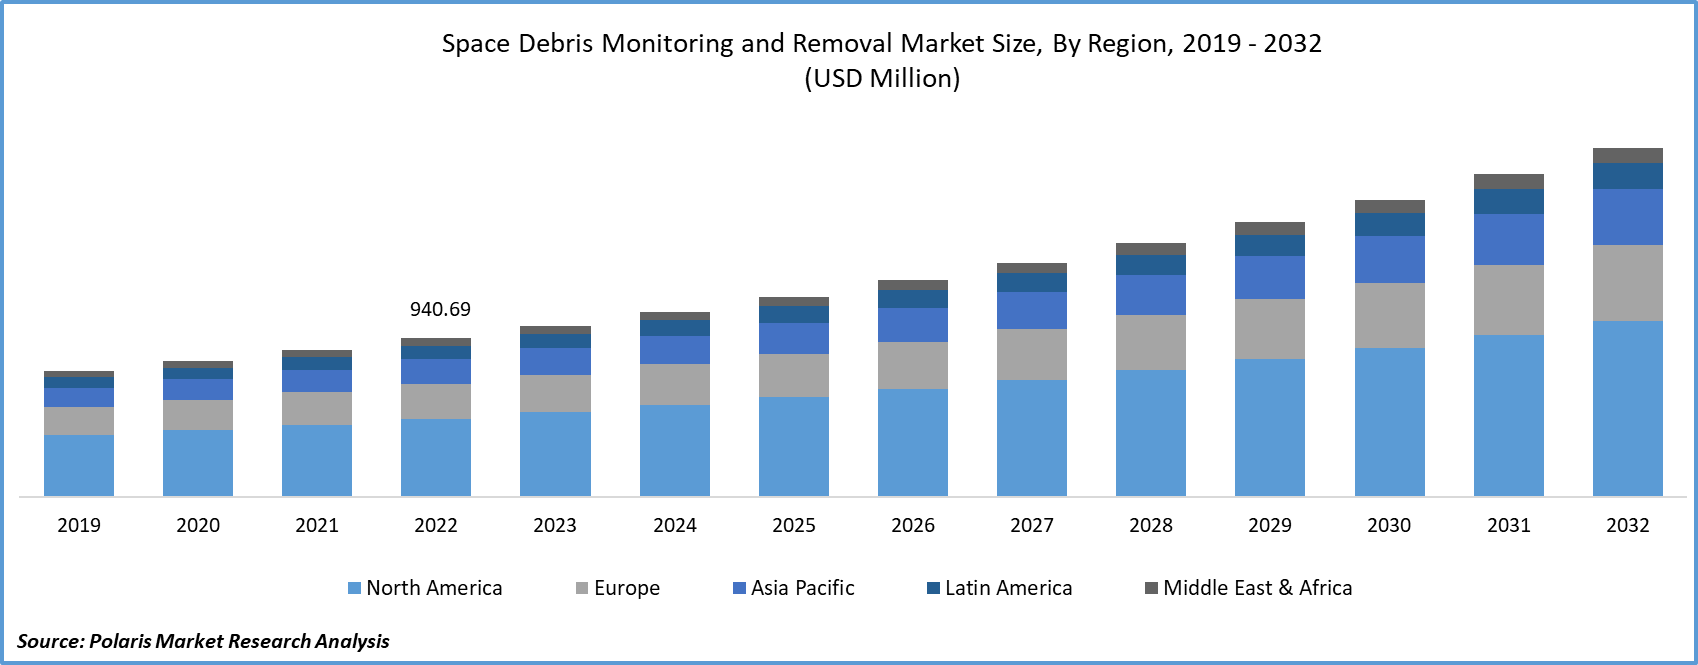 Space Debris Monitoring and Removal Market Size